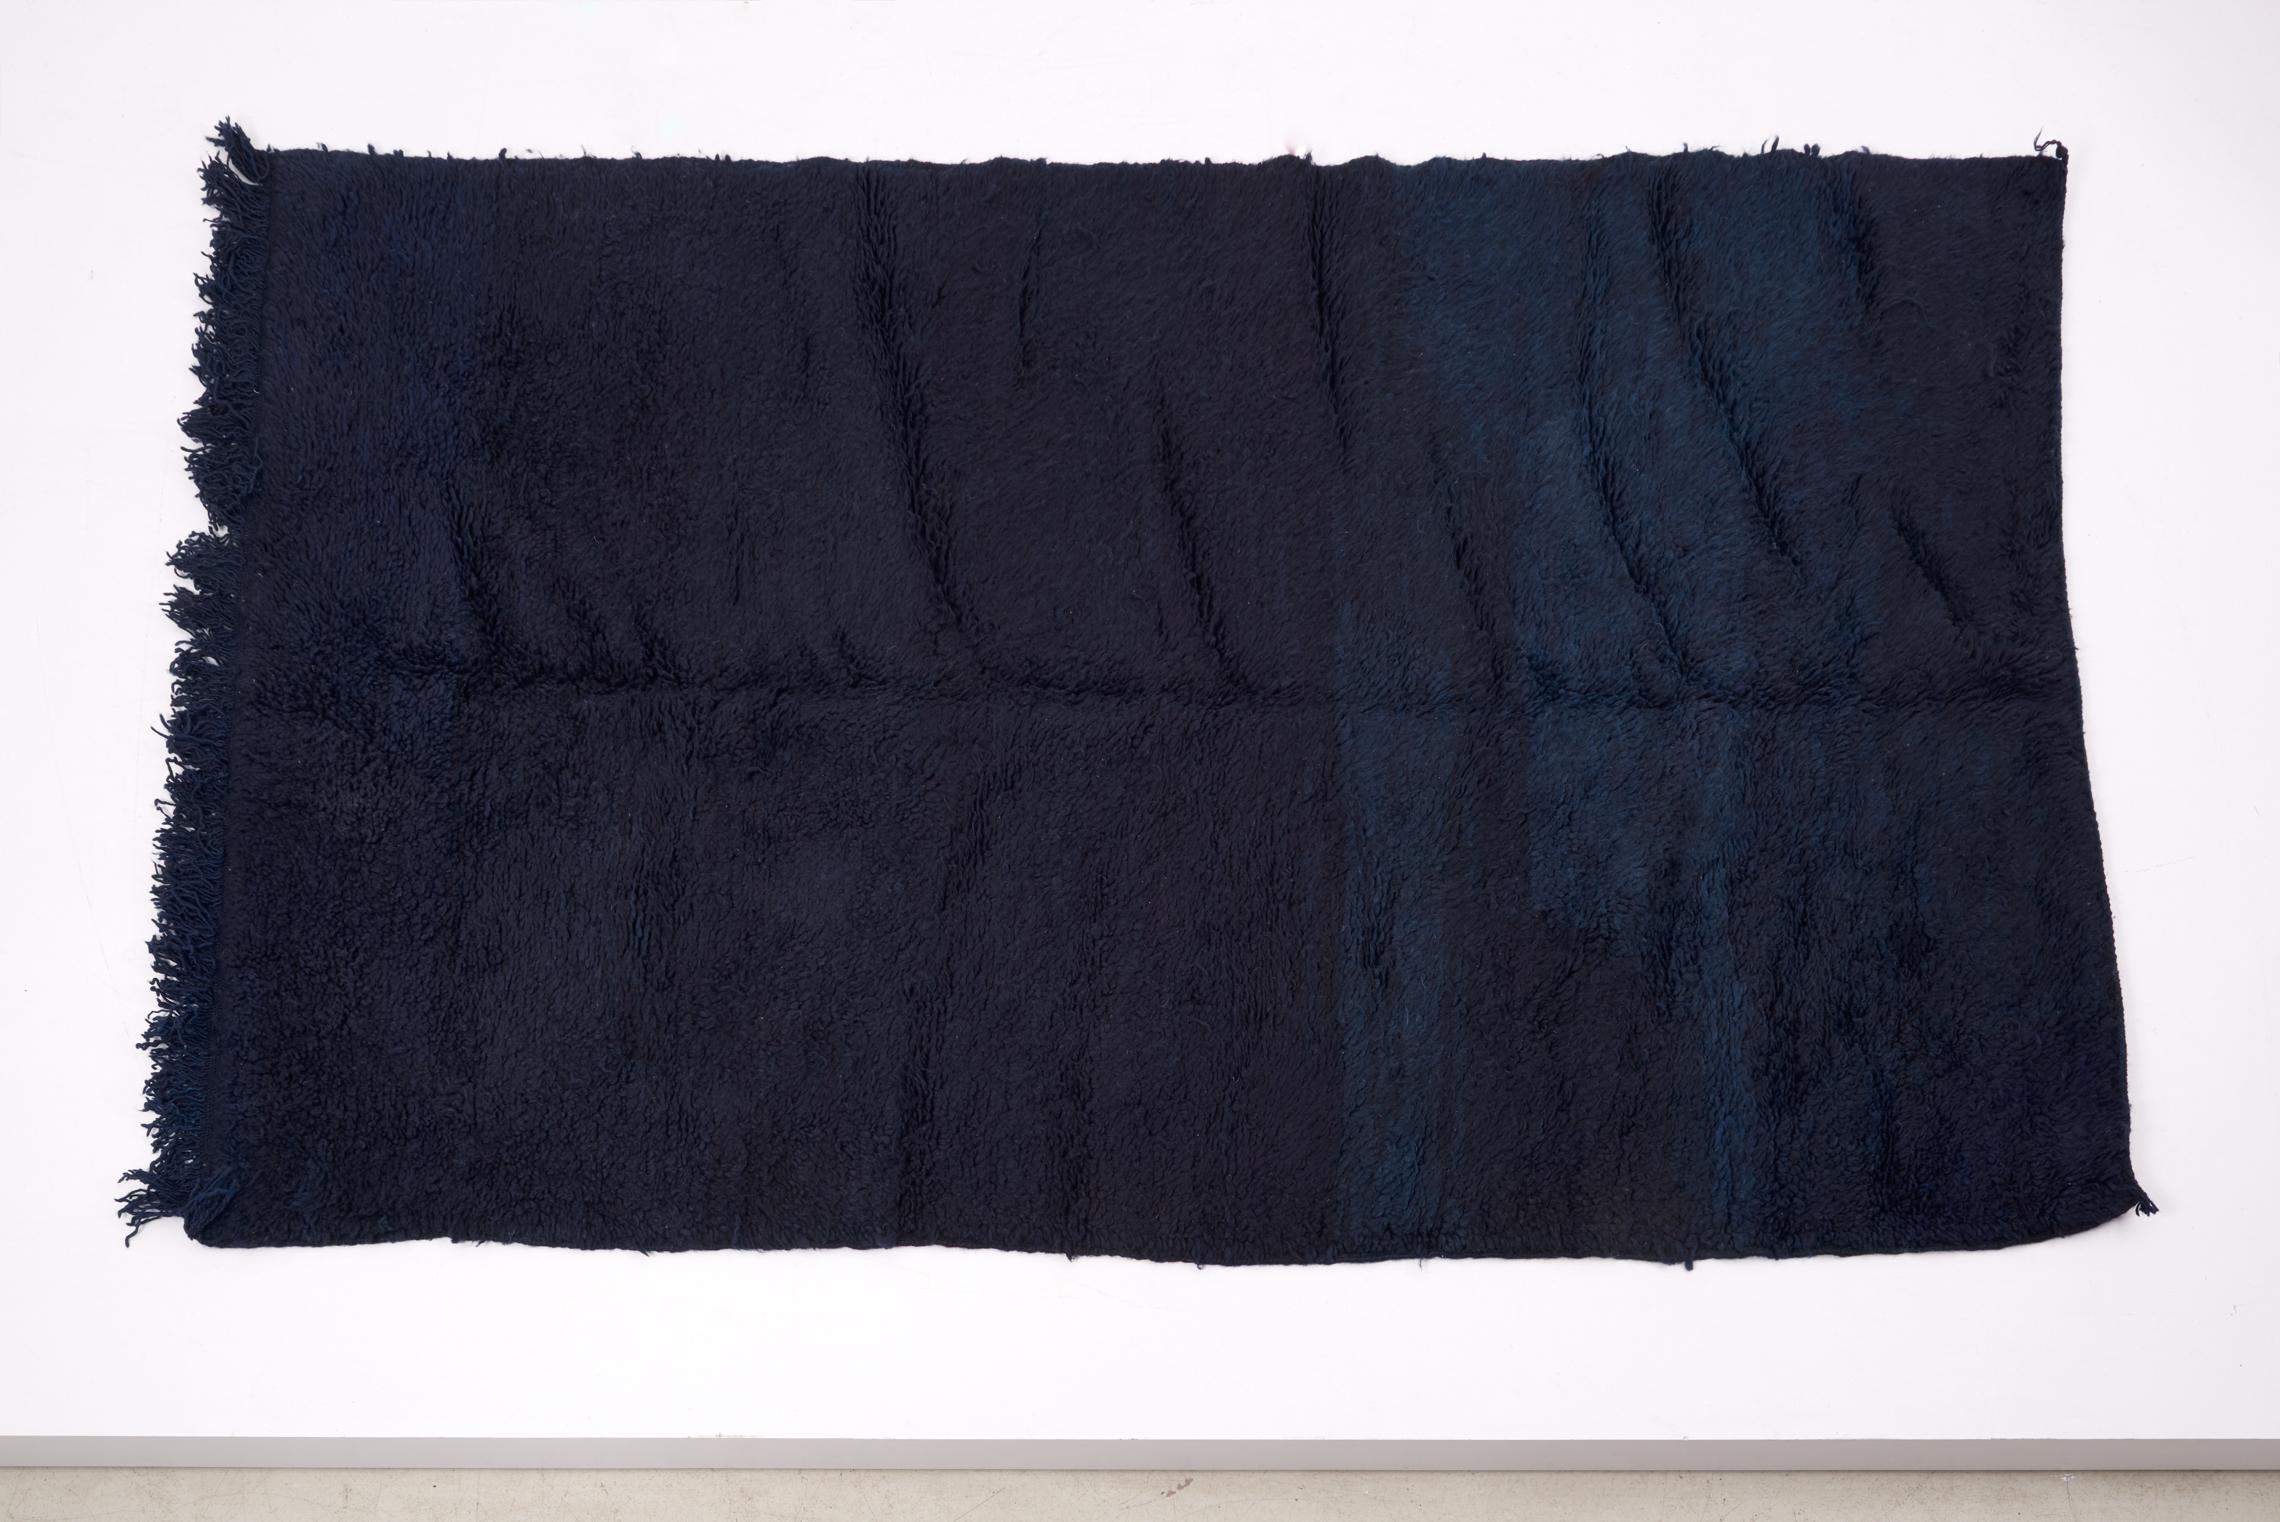 Pair of ink blue Mrirt carpets in hand dyed wool, late 20th century. Measures: 150 x 250 cm.